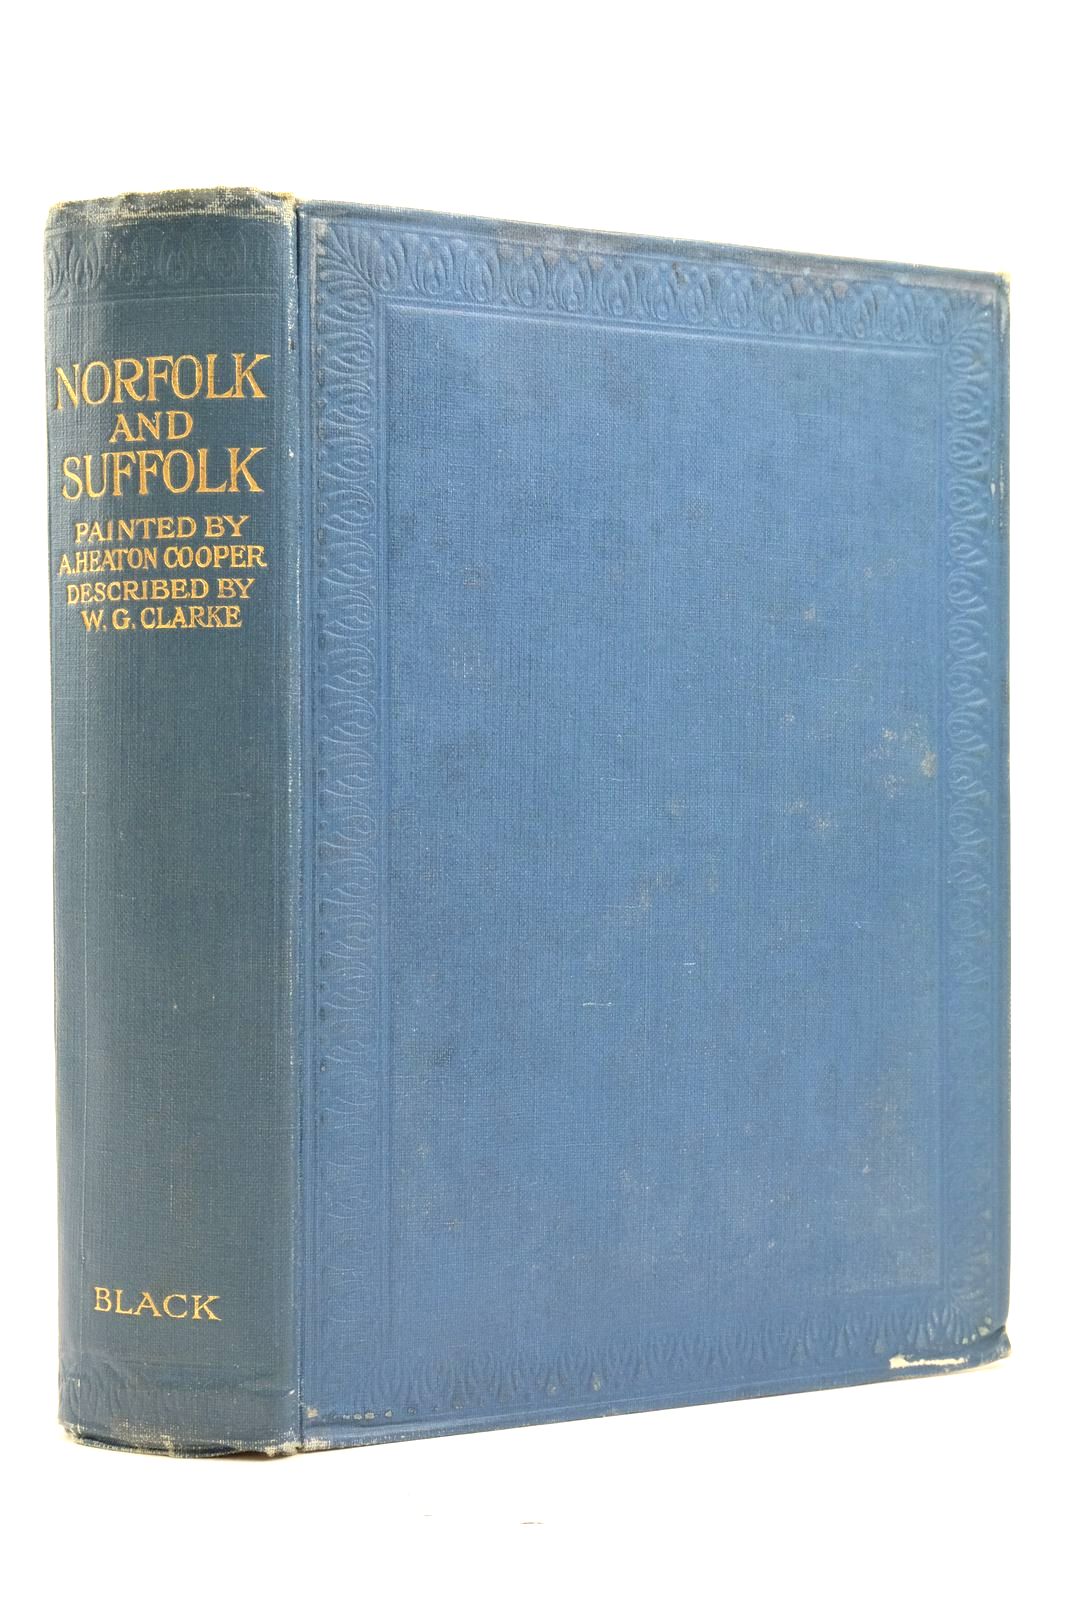 Photo of NORFOLK & SUFFOLK written by Clarke, W.G. illustrated by Cooper, A. Heaton published by A. &amp; C. Black Ltd. (STOCK CODE: 2137334)  for sale by Stella & Rose's Books